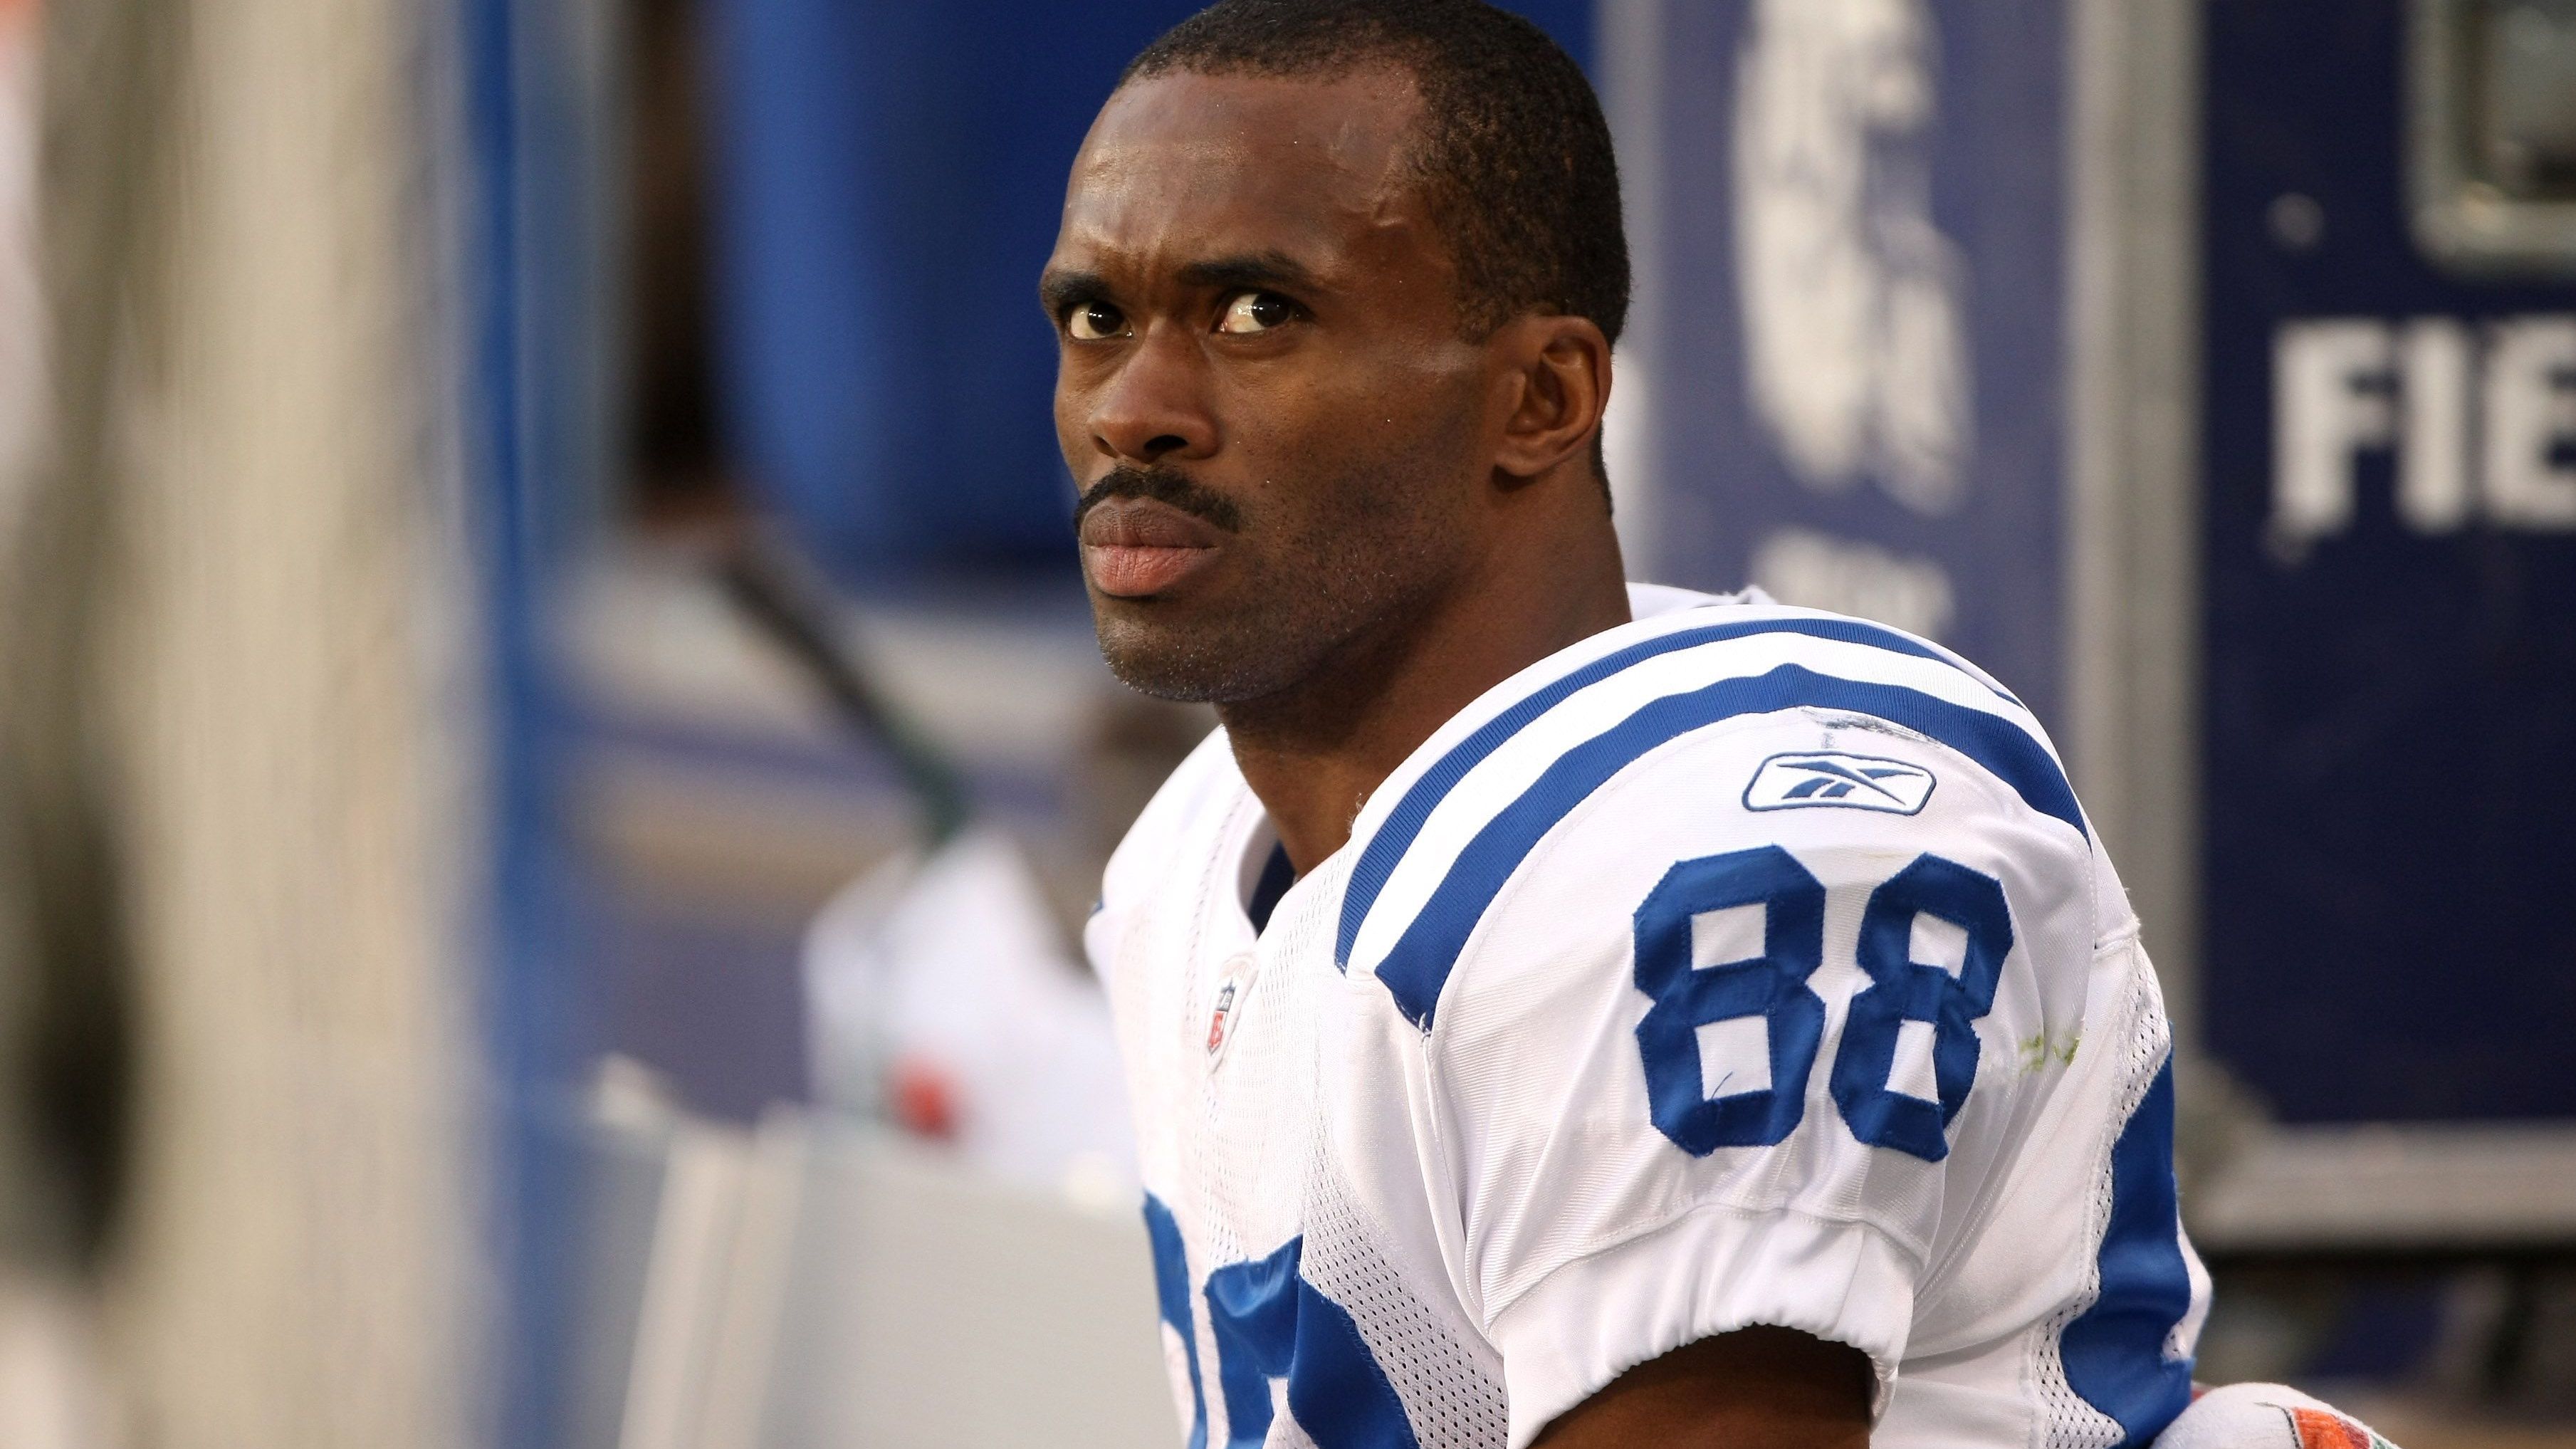 <strong>Pick 19: Marvin Harrison (Wide Receiver)</strong><br>Team: Indianapolis Colts, 1996<br>Honorable Mention:&nbsp;Randall McDaniel<br><br><em><strong>Fun Fact:</strong> Marvin Harrison ist der Vater von Marvin Harrison Jr., der im NFL Draft 2024 als Top-Wide-Receiver-Talent gelistet ist.</em>